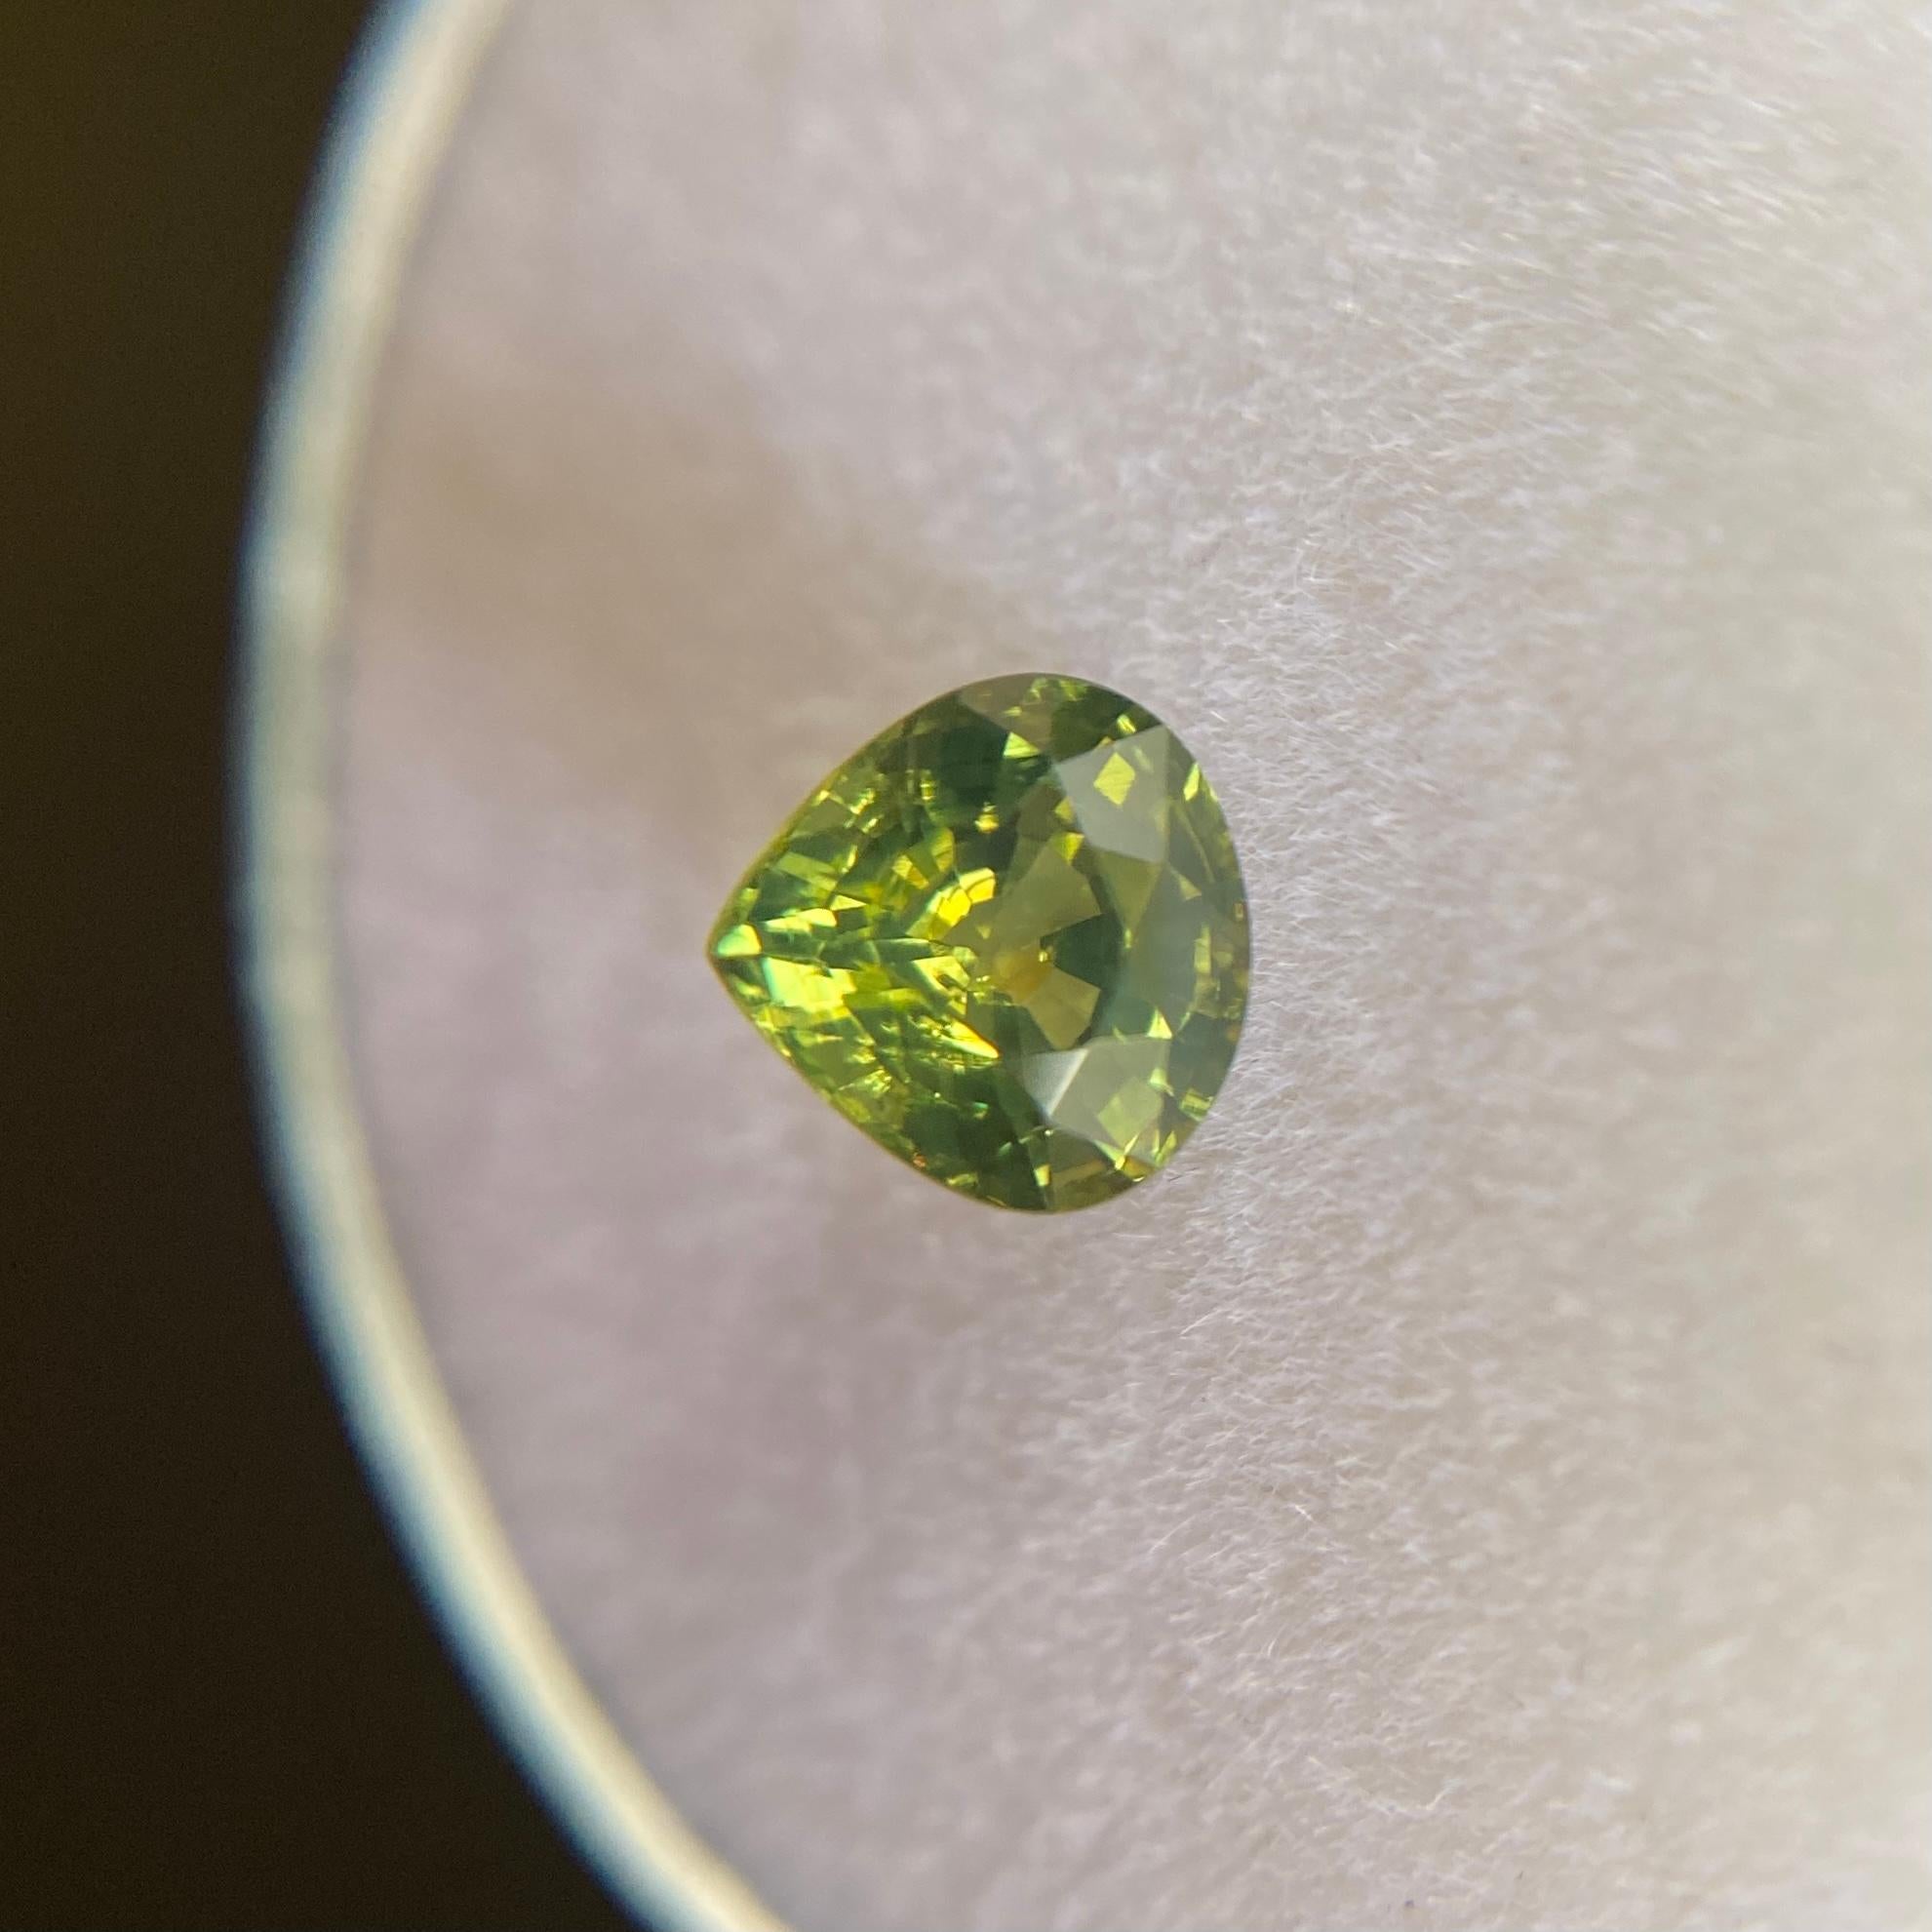 Natural Untreated Green Yellow Australian Sapphire Gemstone.

0.76 Carat with a beautiful and unique yellowish green colour and good clarity, a clean stone with only some small natural inclusions visible when looking closely.

Also has an excellent